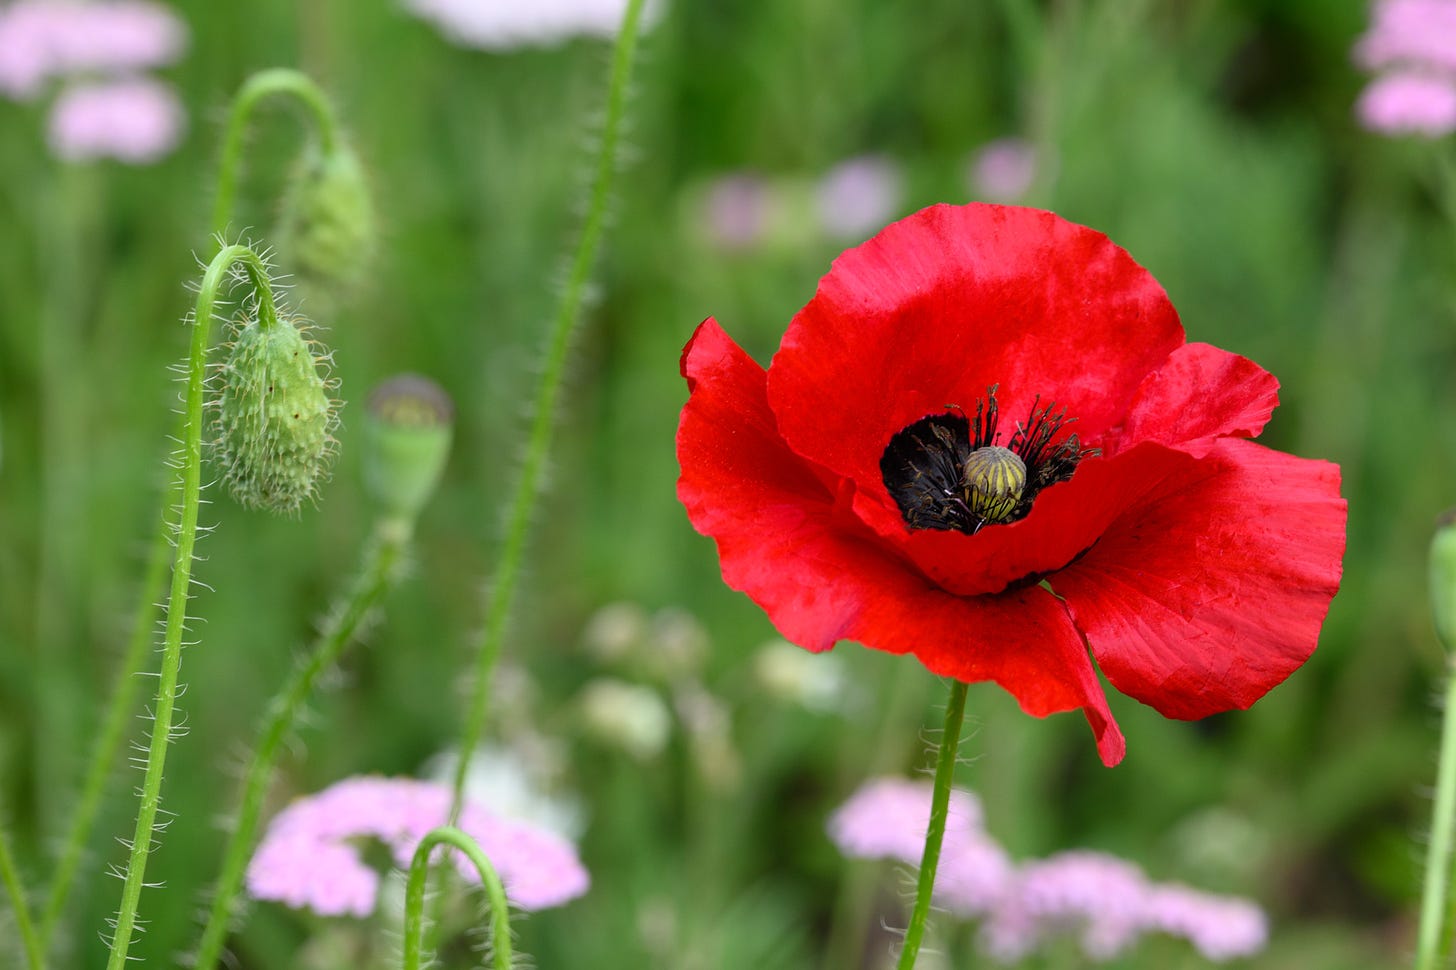 A red poppy against a field of green with a few pink flowers among the greenery